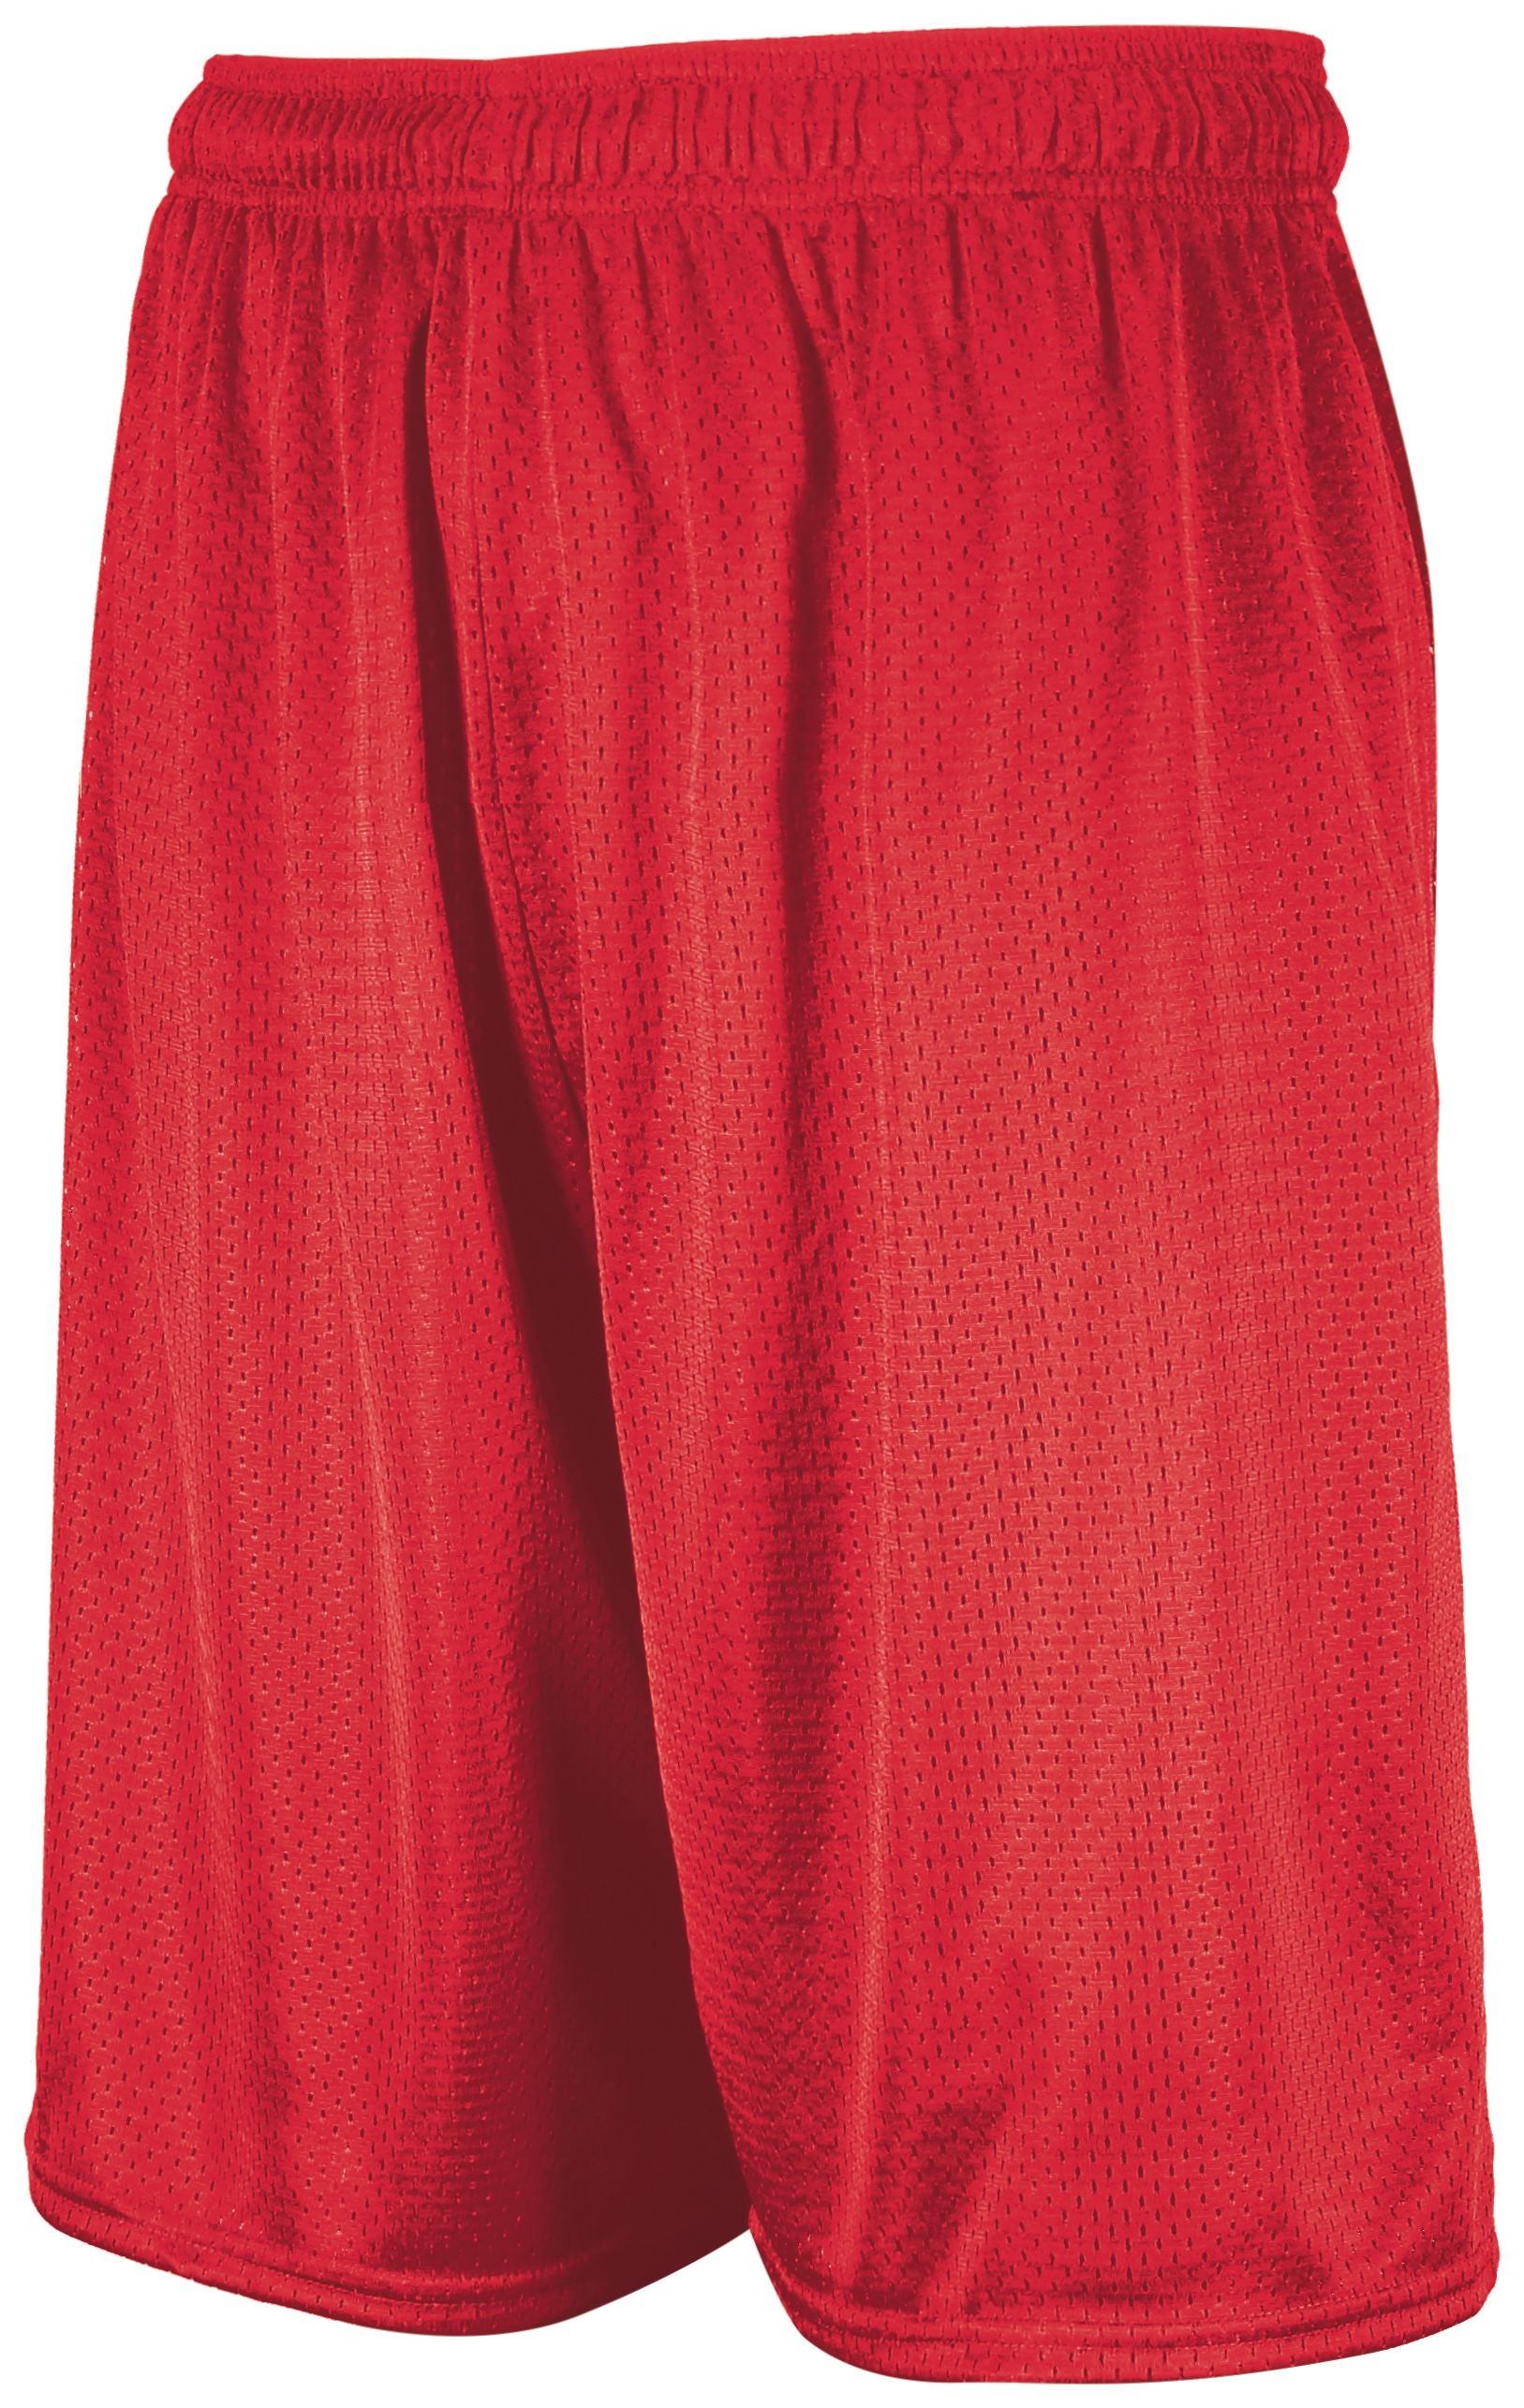 Russell Athletic Dri-Power Mesh Shorts in True Red  -Part of the Adult, Adult-Shorts, Russell-Athletic-Products product lines at KanaleyCreations.com